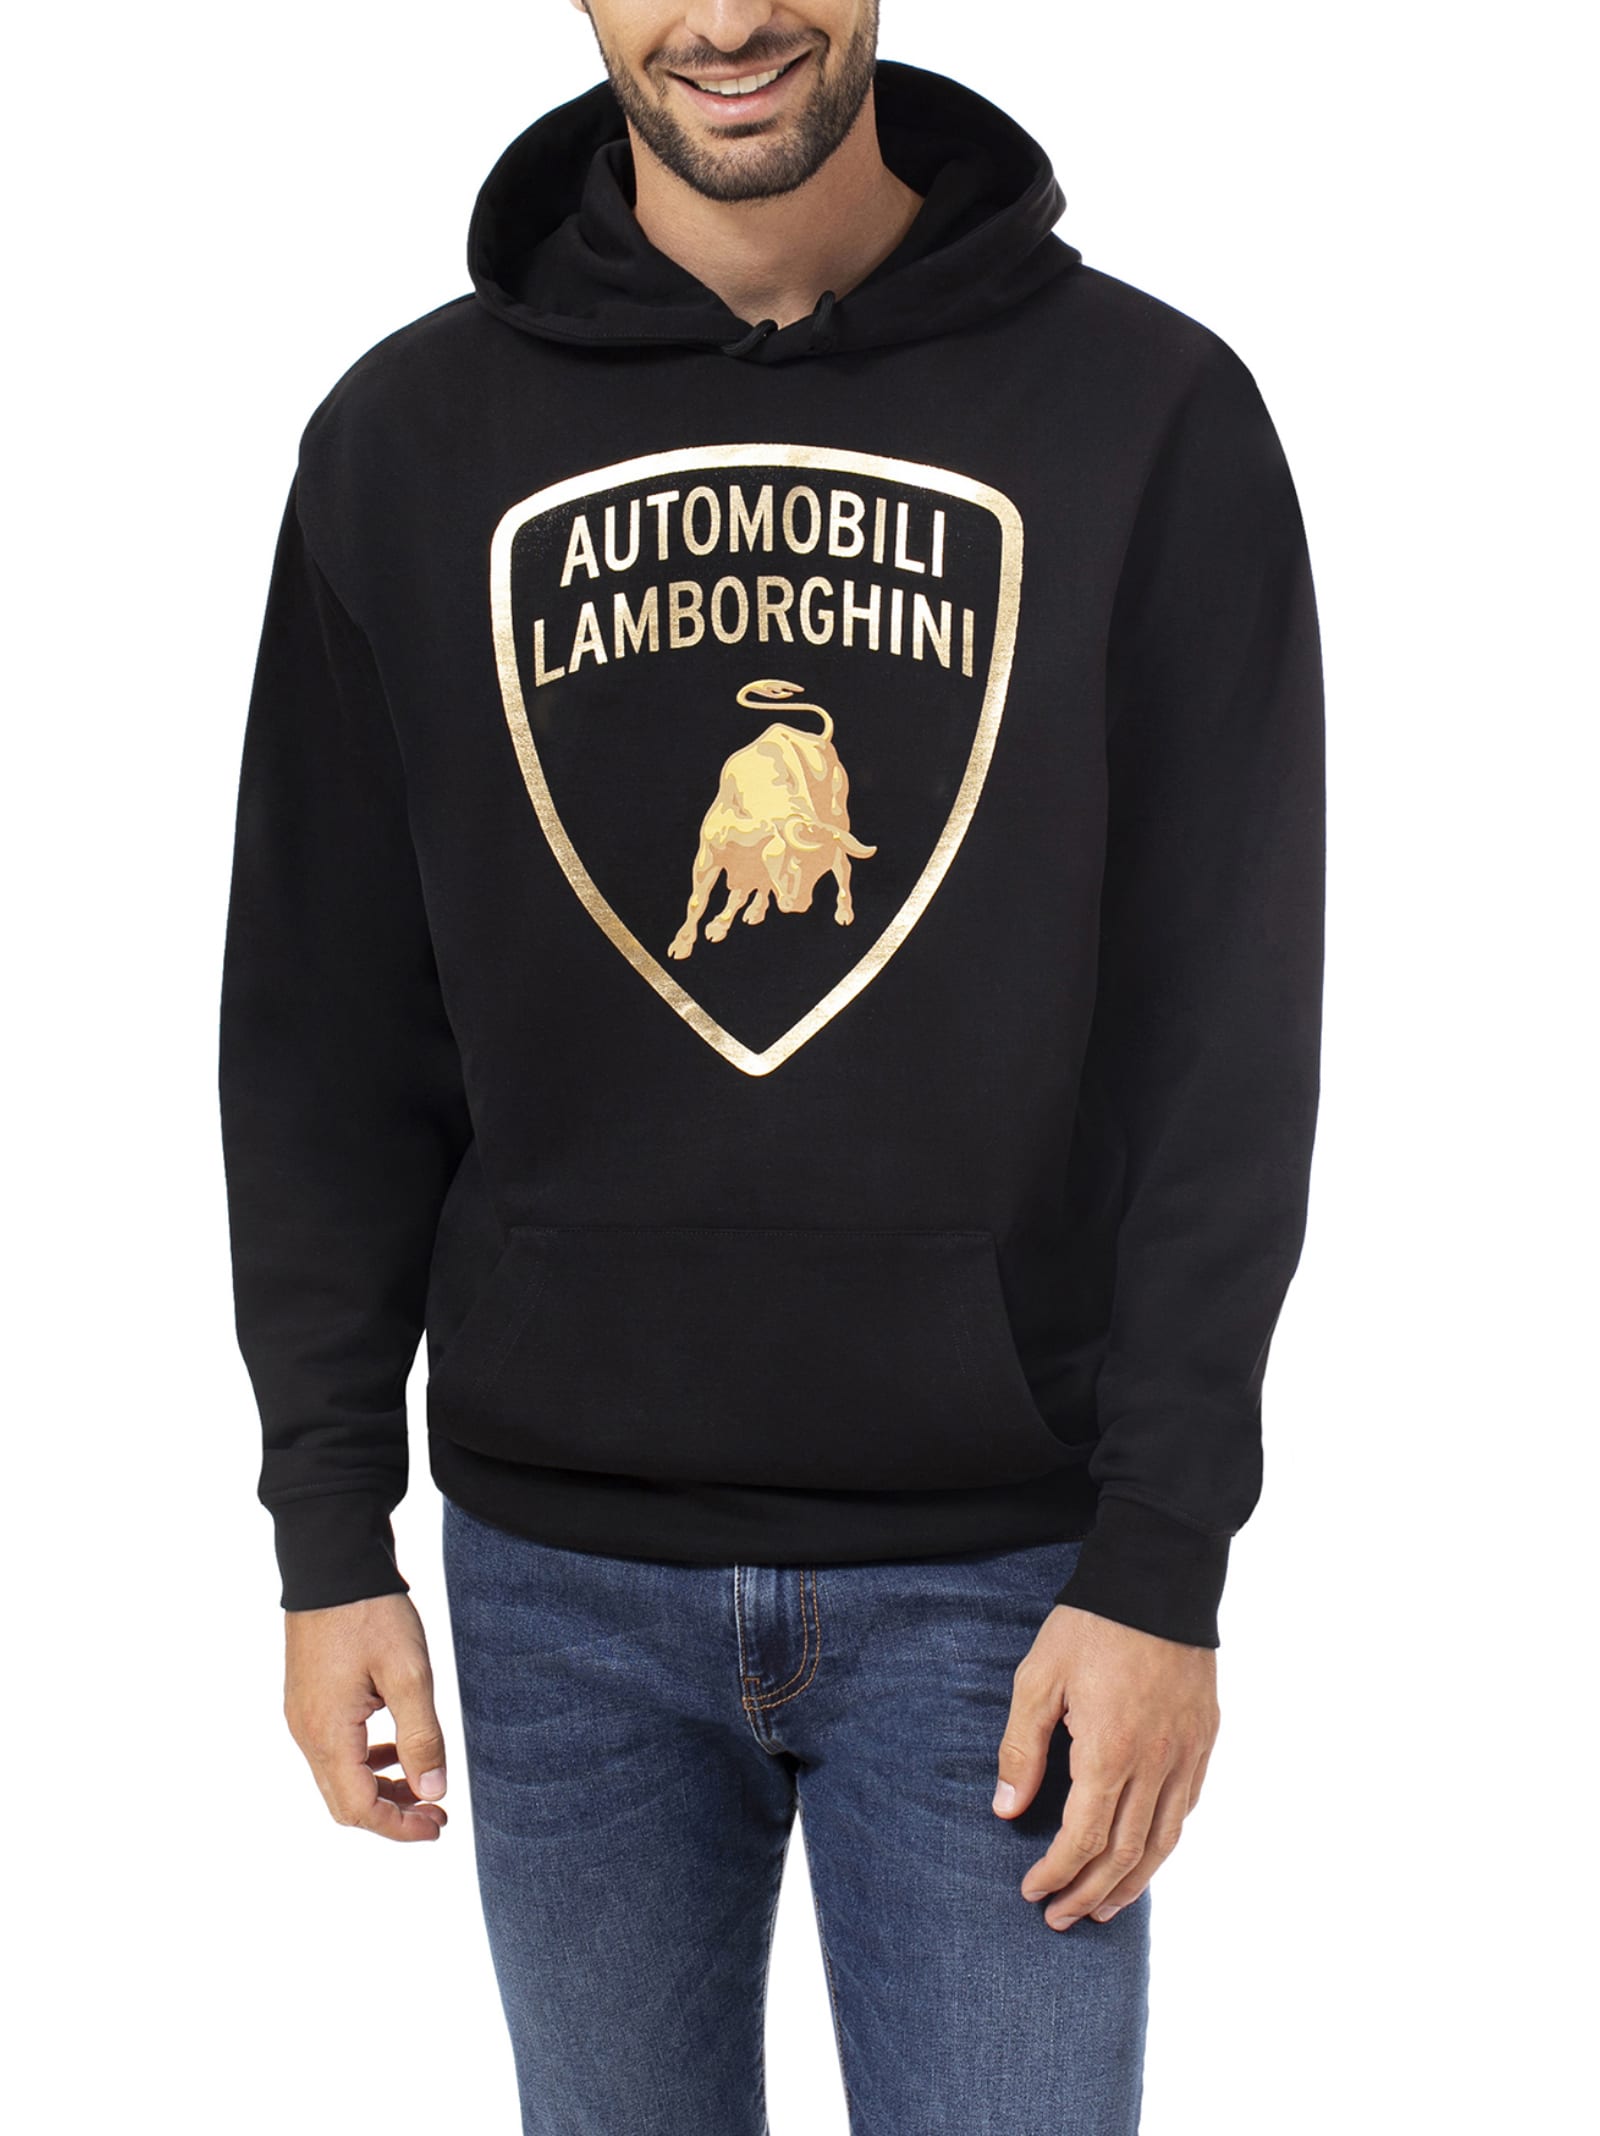 Automobili Lamborghini Black Loose Fit Embroidered With Hoodie